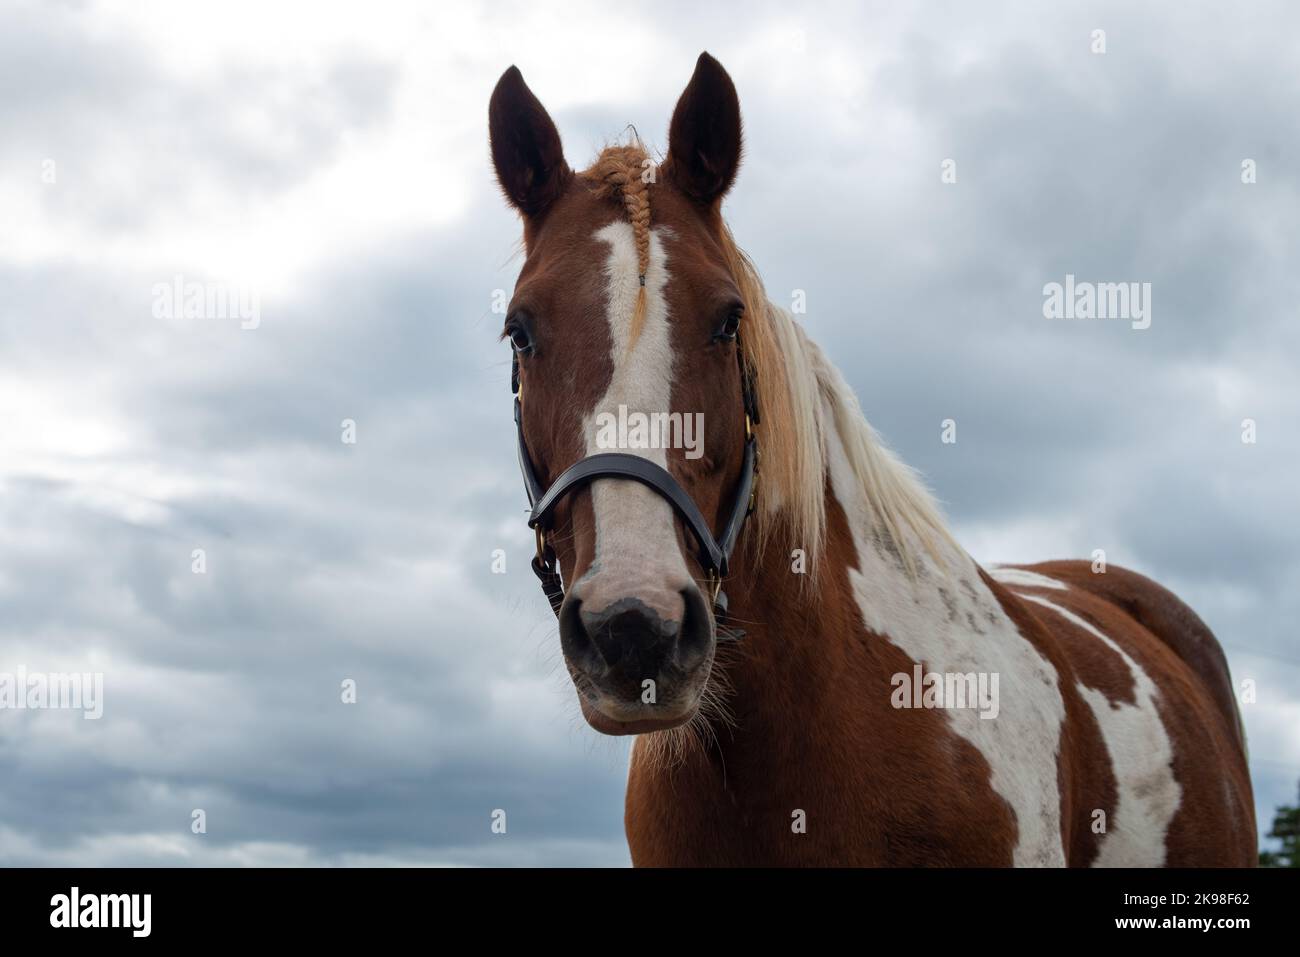 A large brown horse with a white mark down the middle of its head and a long white mane. The pinto horse is staring straight ahead with pointy ears. Stock Photo